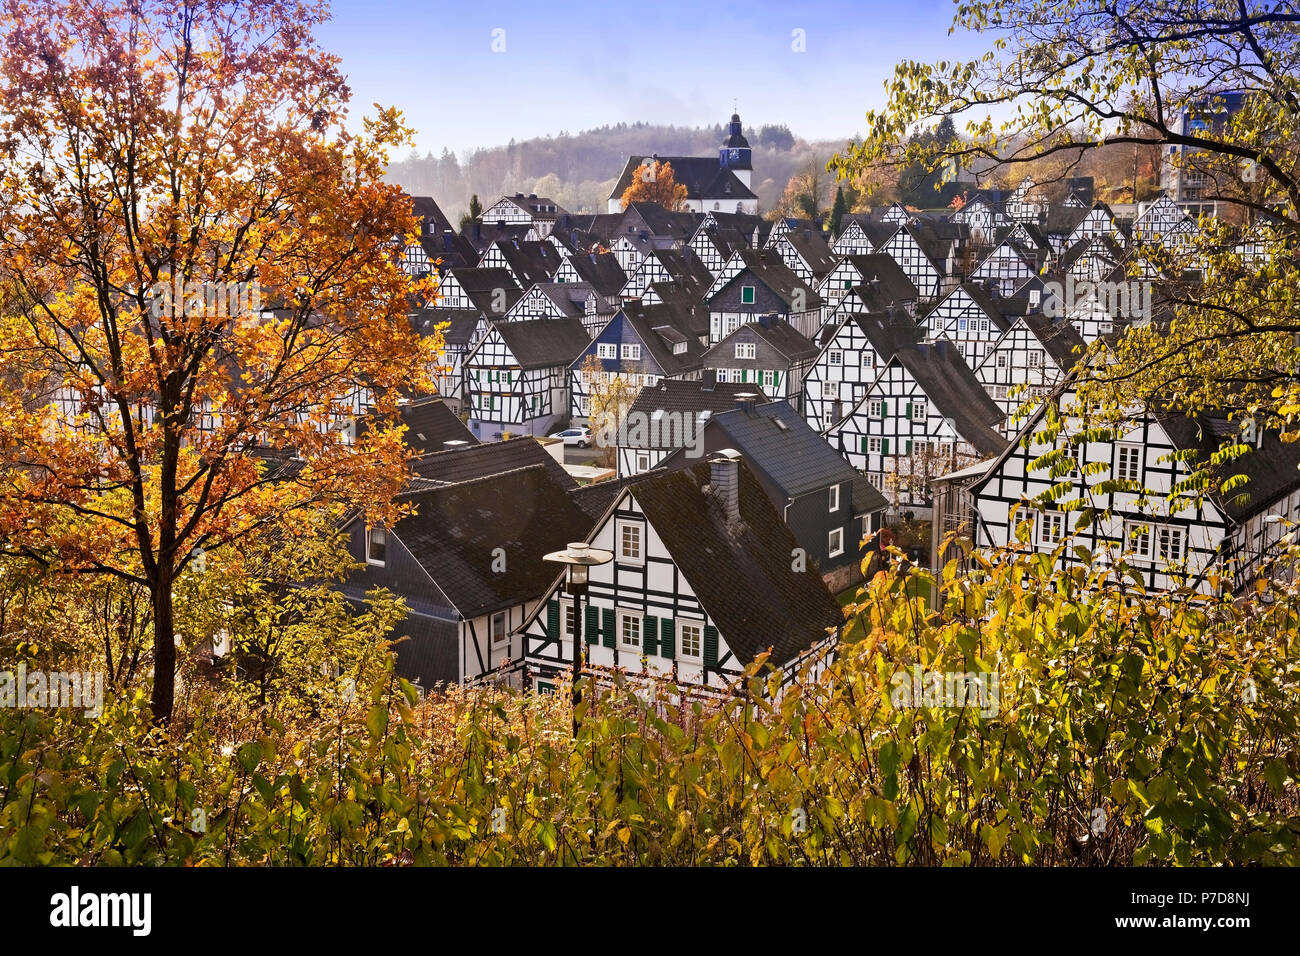 Alter Flecken, historic old town with half-timbered houses in autumn, Freudenberg, Siegerland, North Rhine-Westphalia, Germany Stock Photo